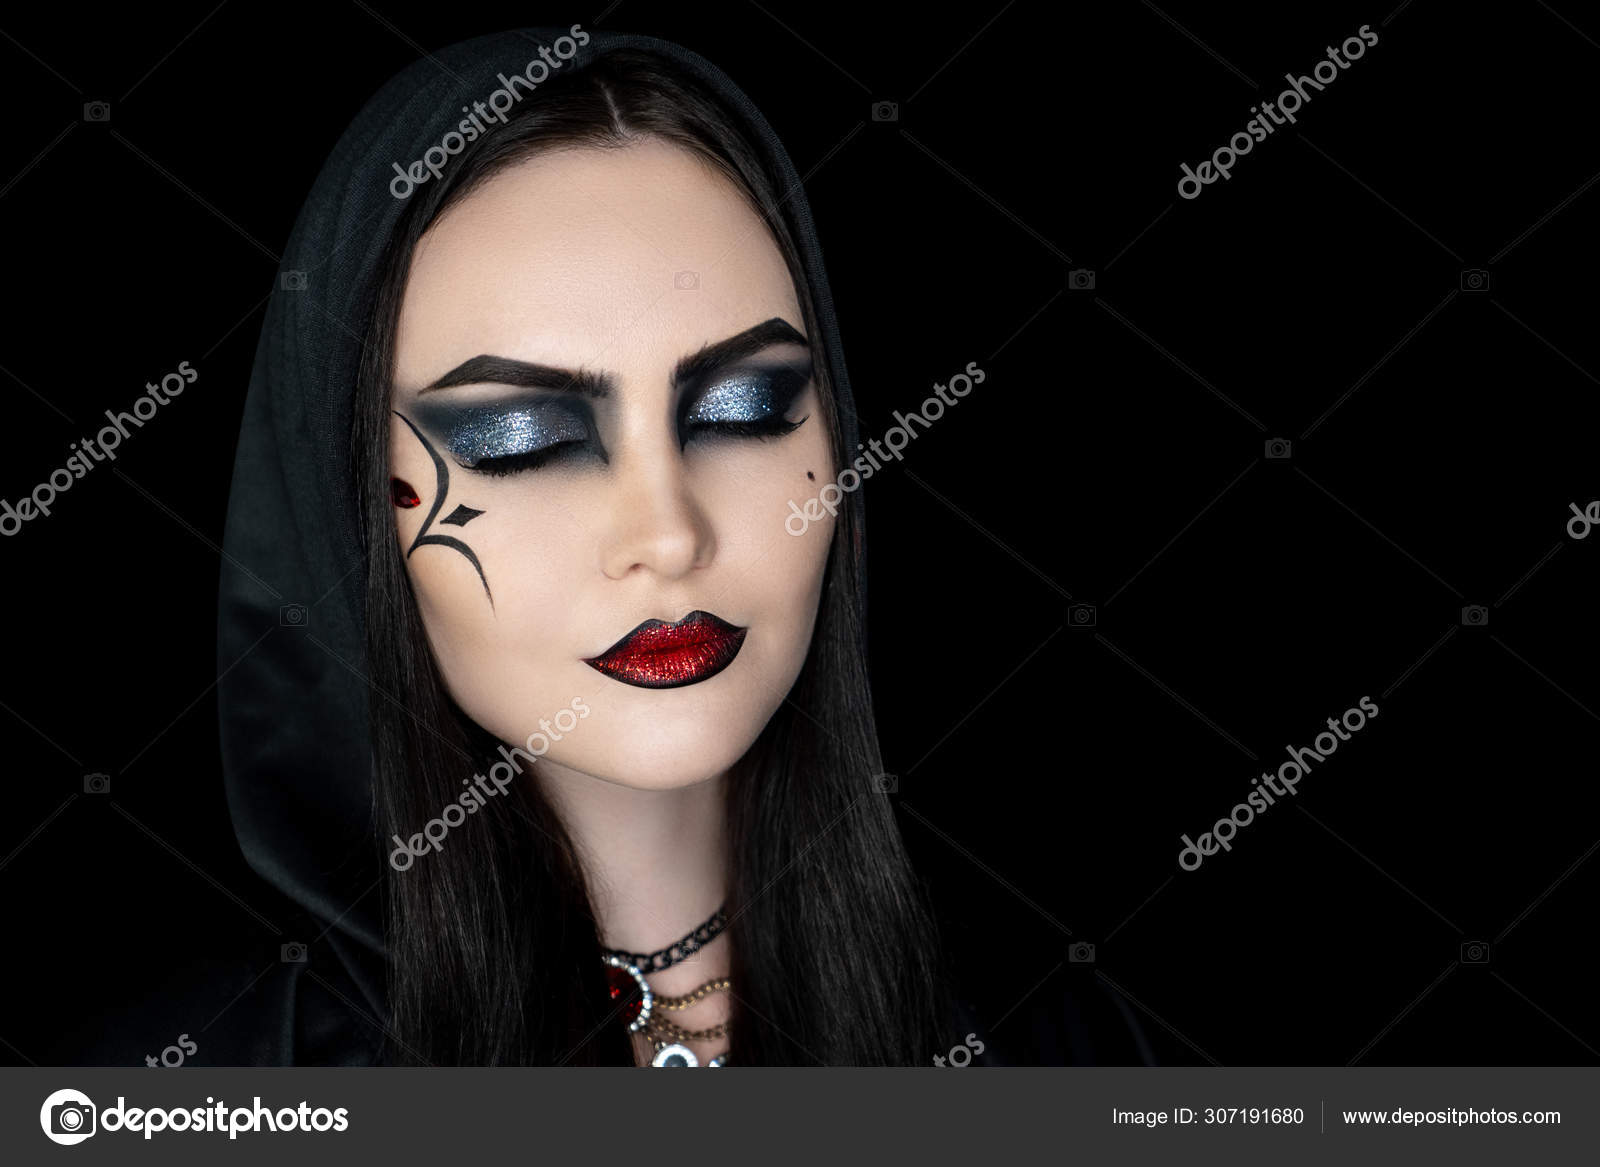 Creative Makeup for Crazy Halloween Party Stock Image - Image of hobby,  machine: 130616583